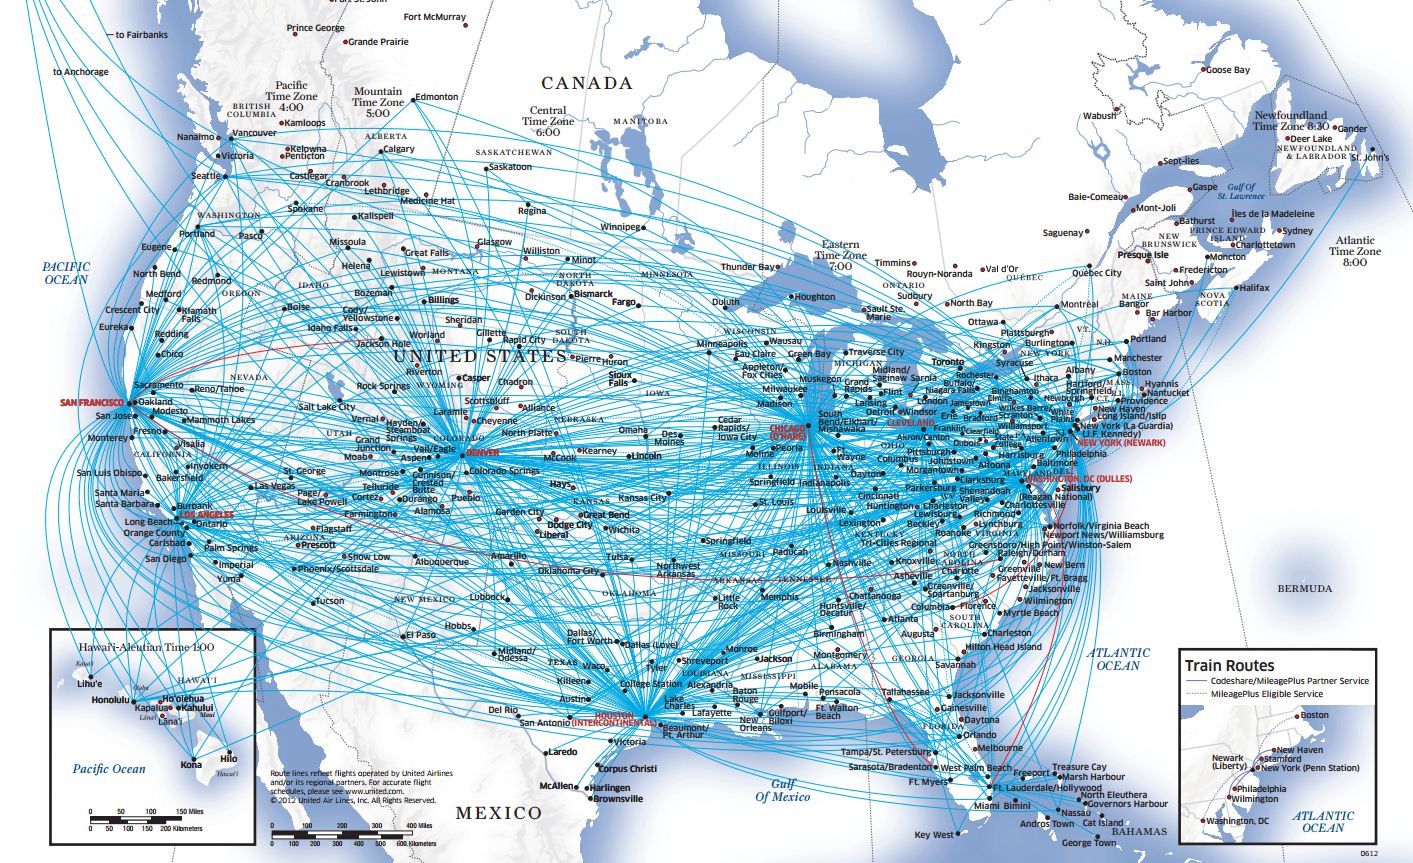 My Travel Pass: Airline Route Maps